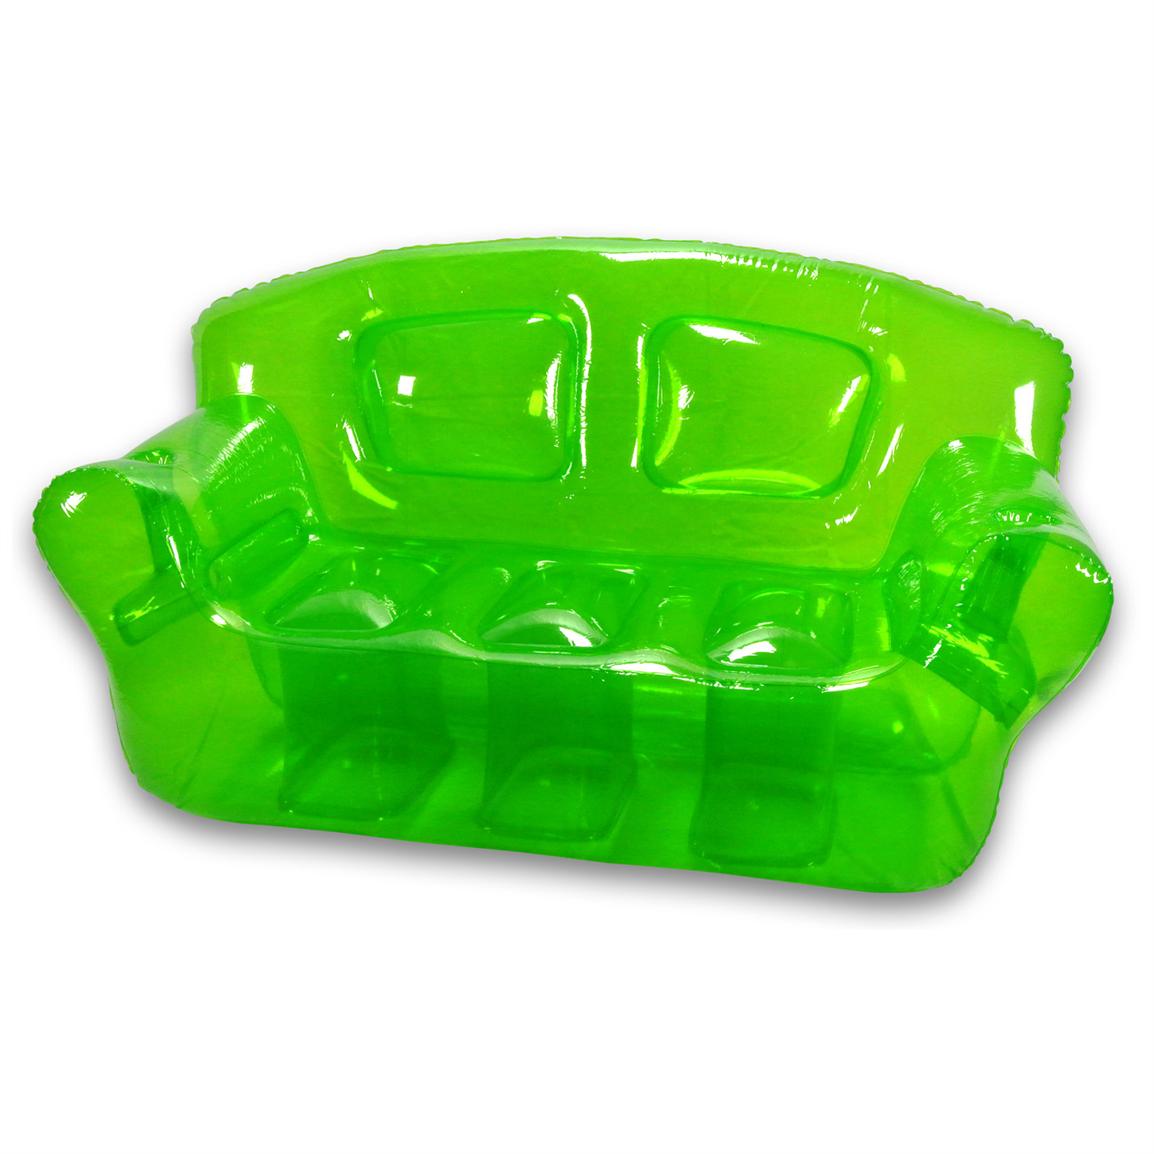 Bubble Inflatables® Inflatable Couch - 218005, at Sportsman's Guide